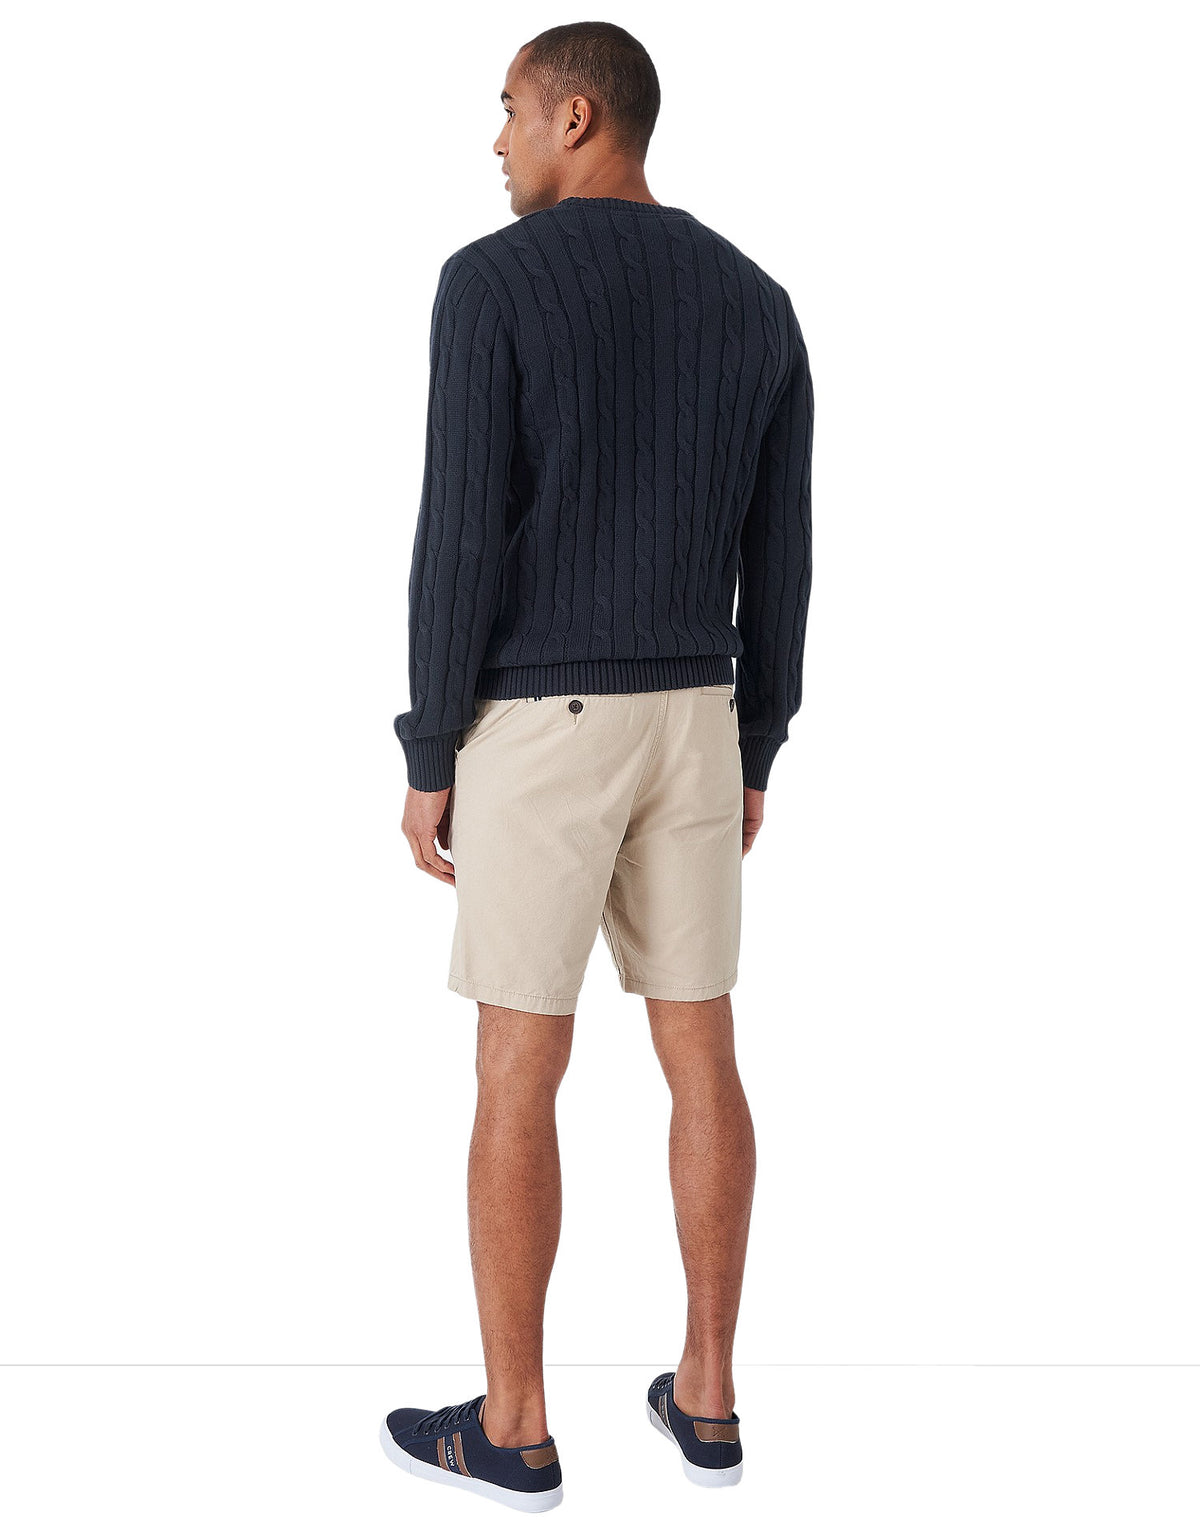 Crew Clothing Mens Cable Crew Jumper, 03, Mpc025, Navy